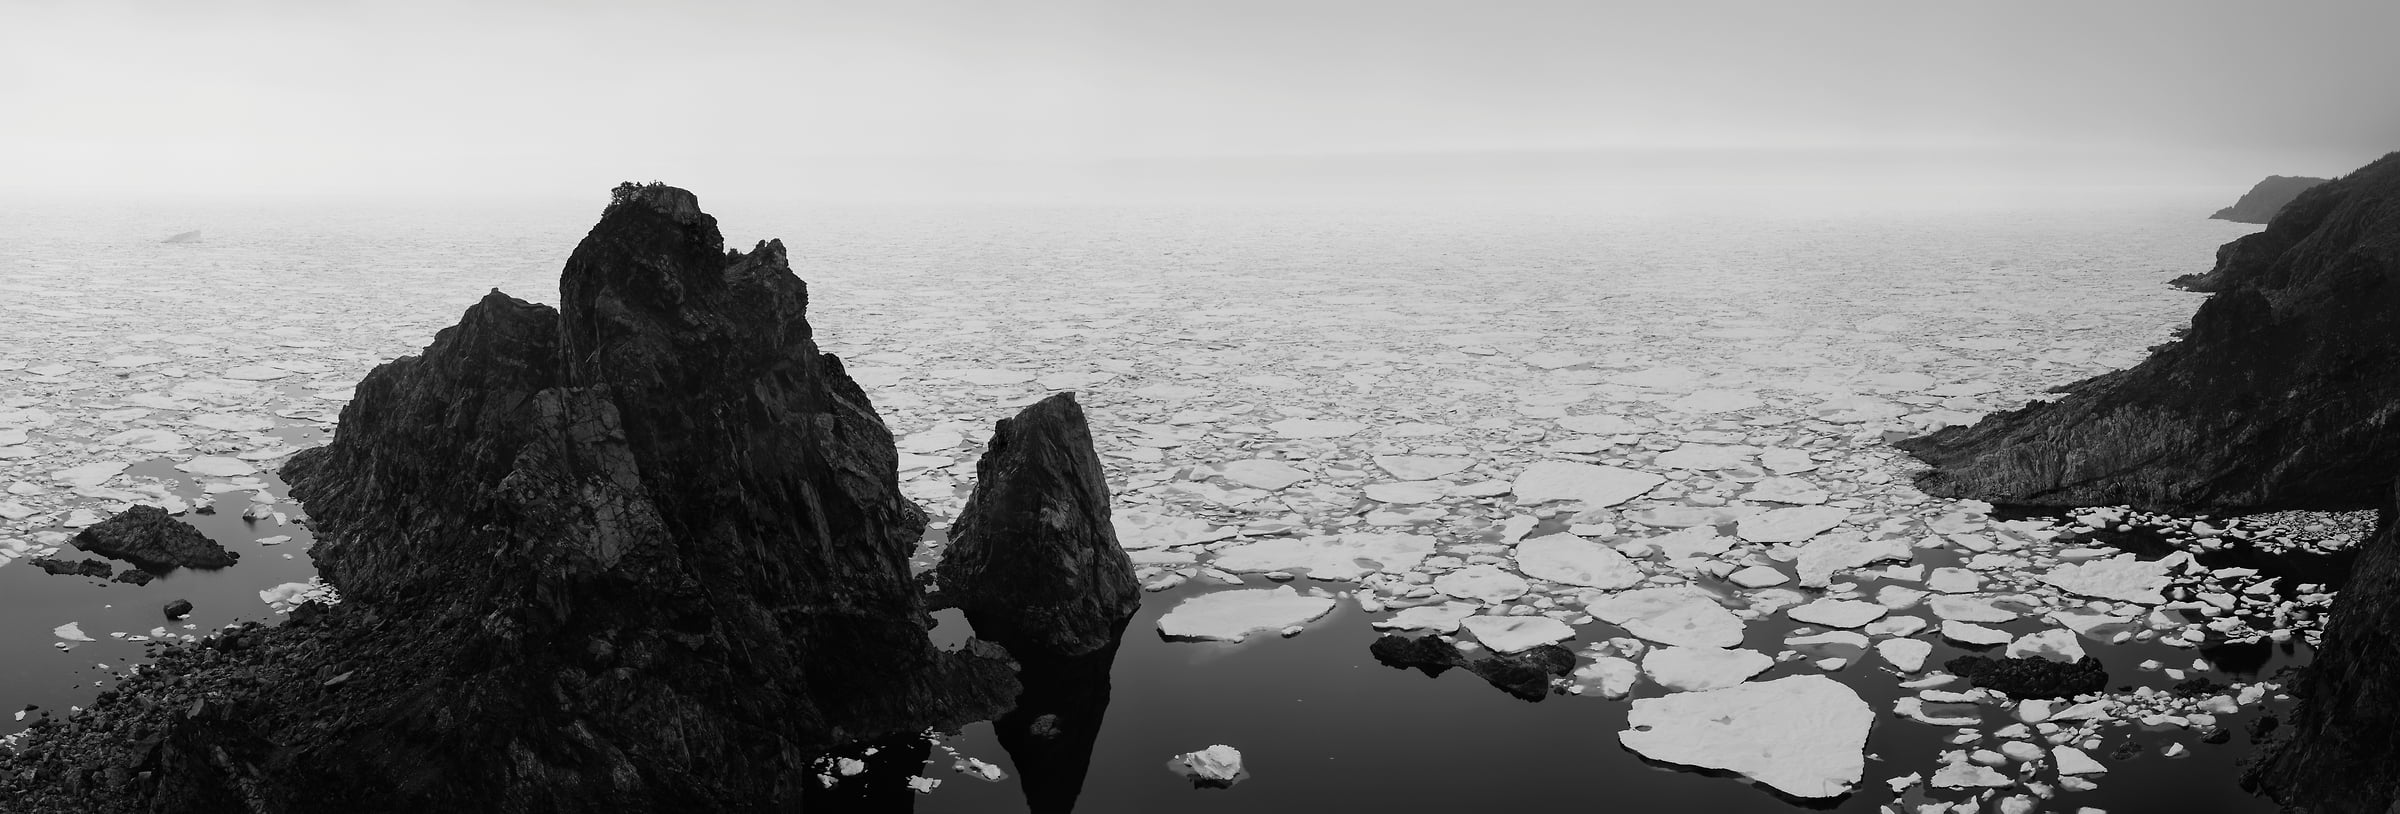 1,580 megapixels! A very high resolution, large-format VAST photo of ice and icebergs floating in an ocean bay; black & white fine art landscape photo created by Scott Dimond in La Scie, Newfoundland, Canada.